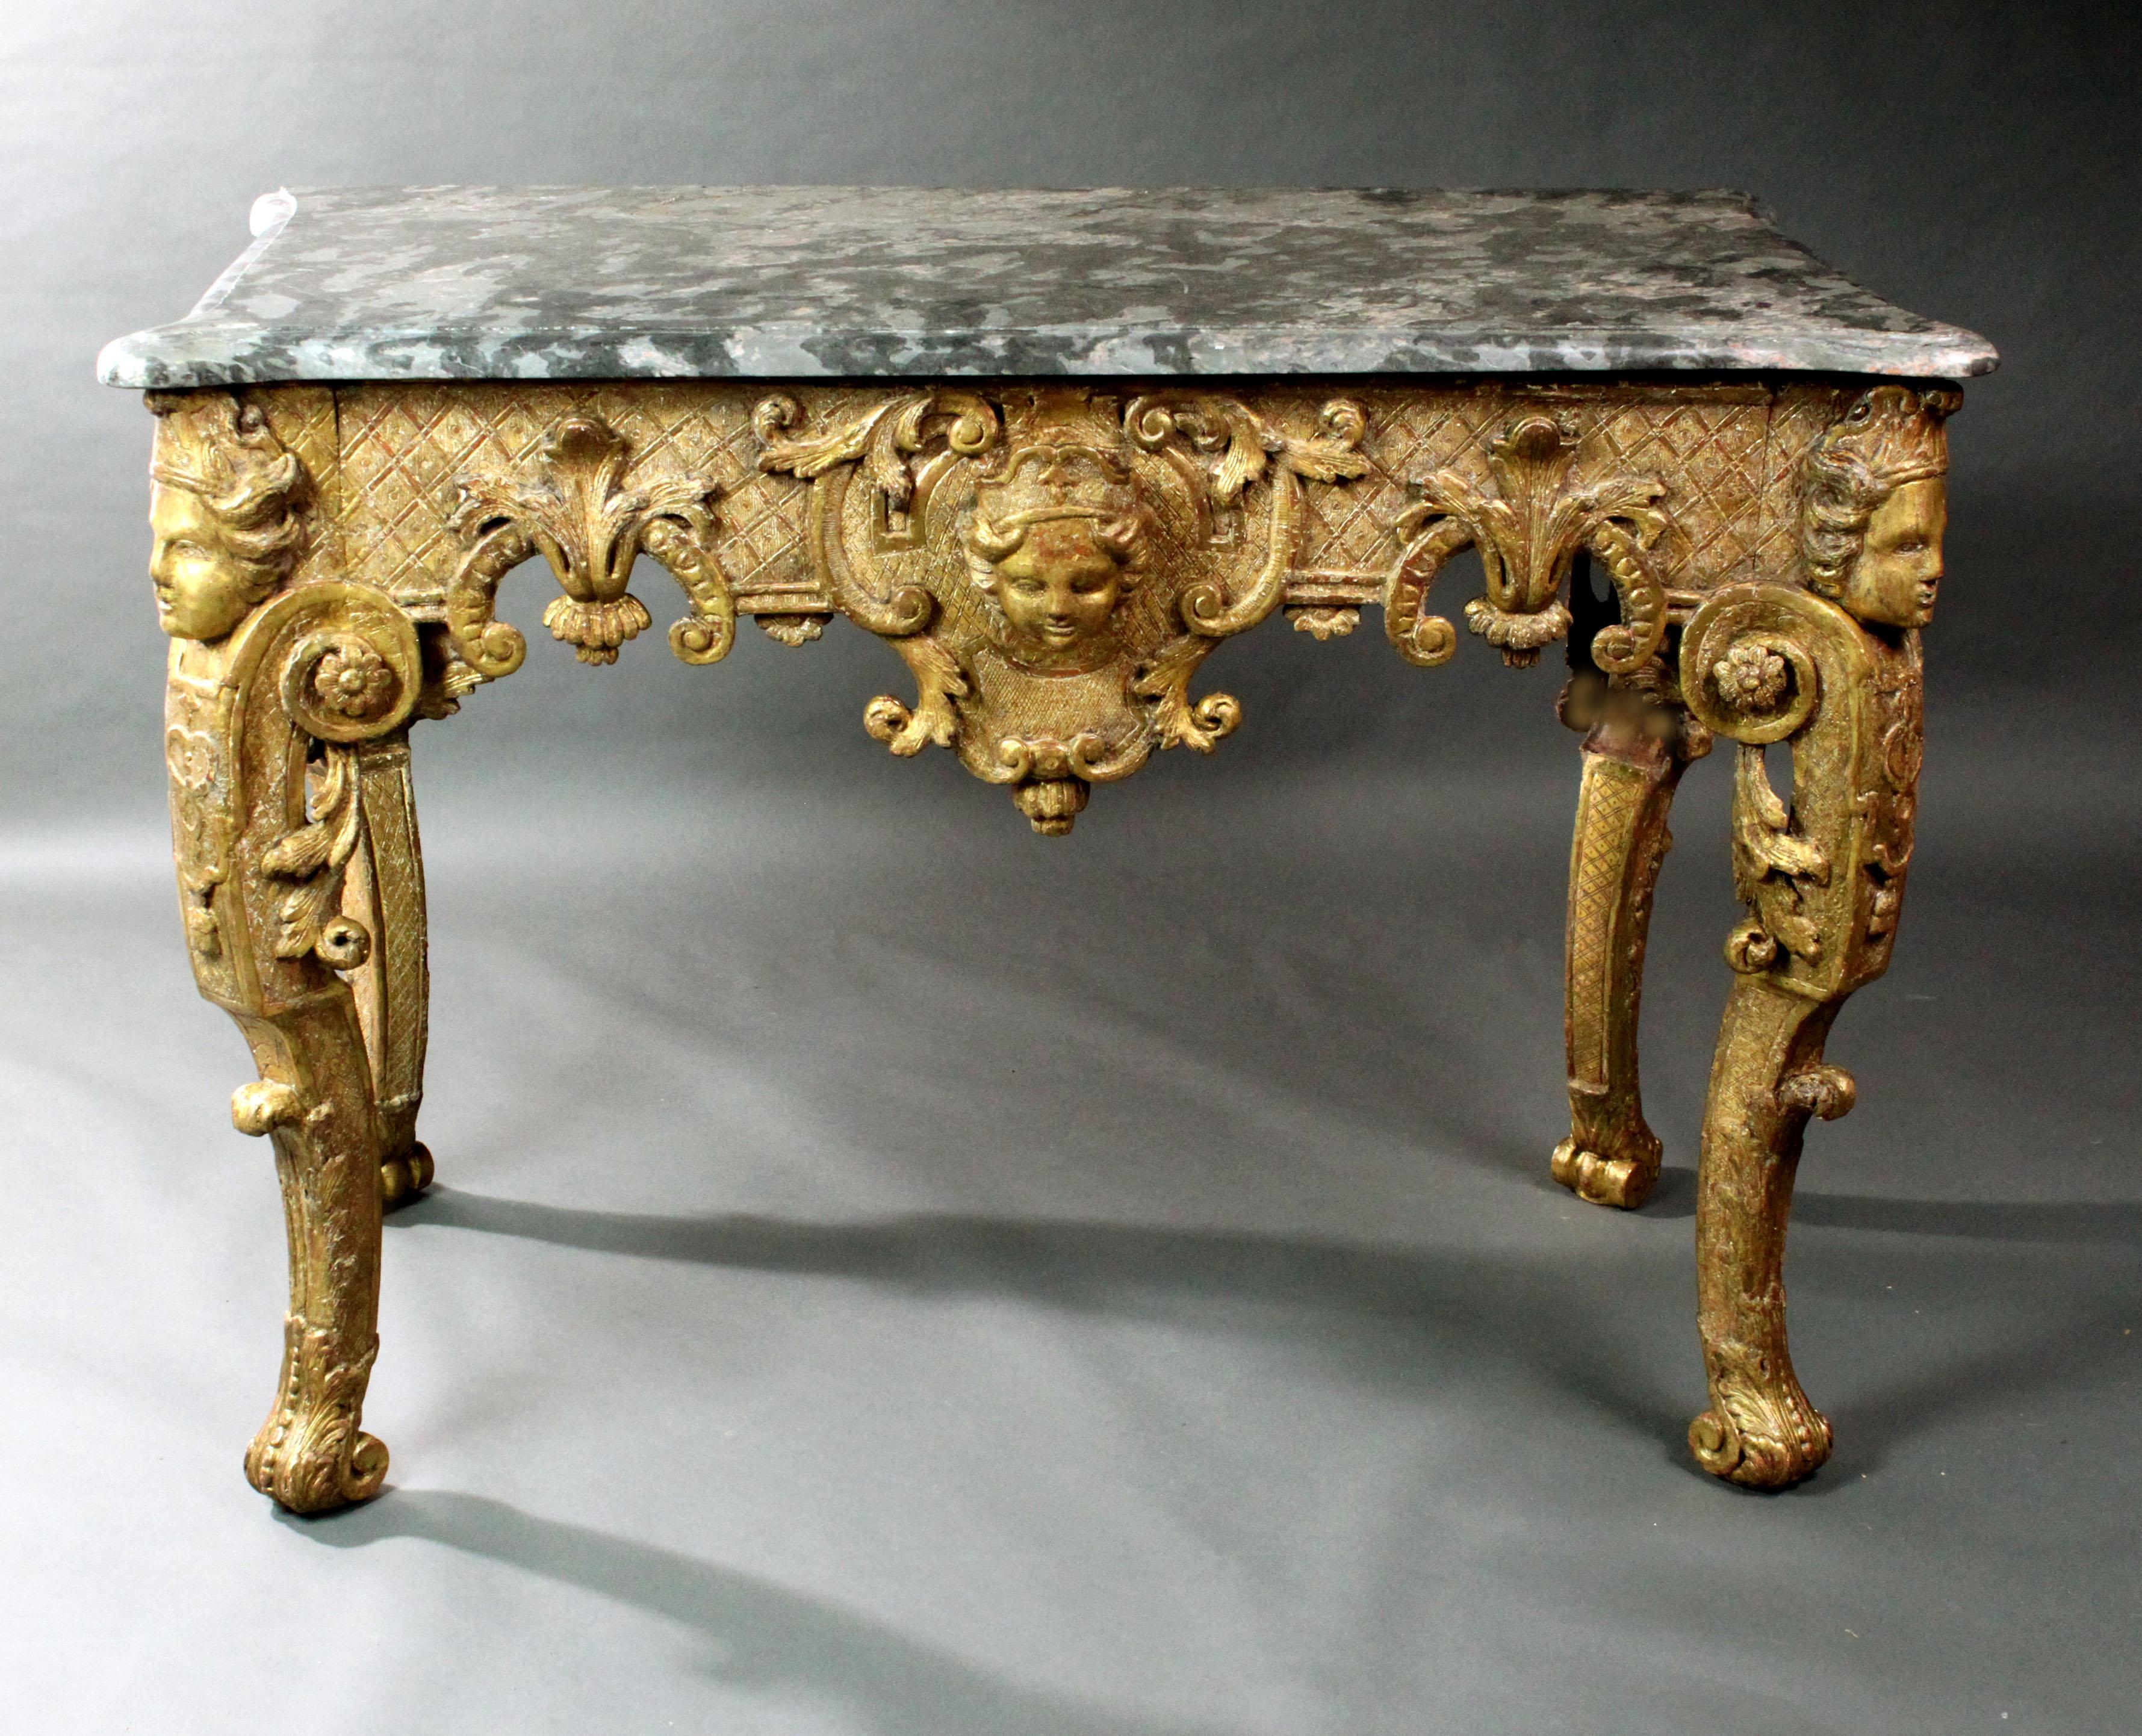 A fine late 17th-early 18th century Italian or French giltwood console table retaining much of its original gilding; supported on well carved caryatids with scroll feet; the frieze with carved acanthus leaves, Rococo scrolls and a carved mask on a